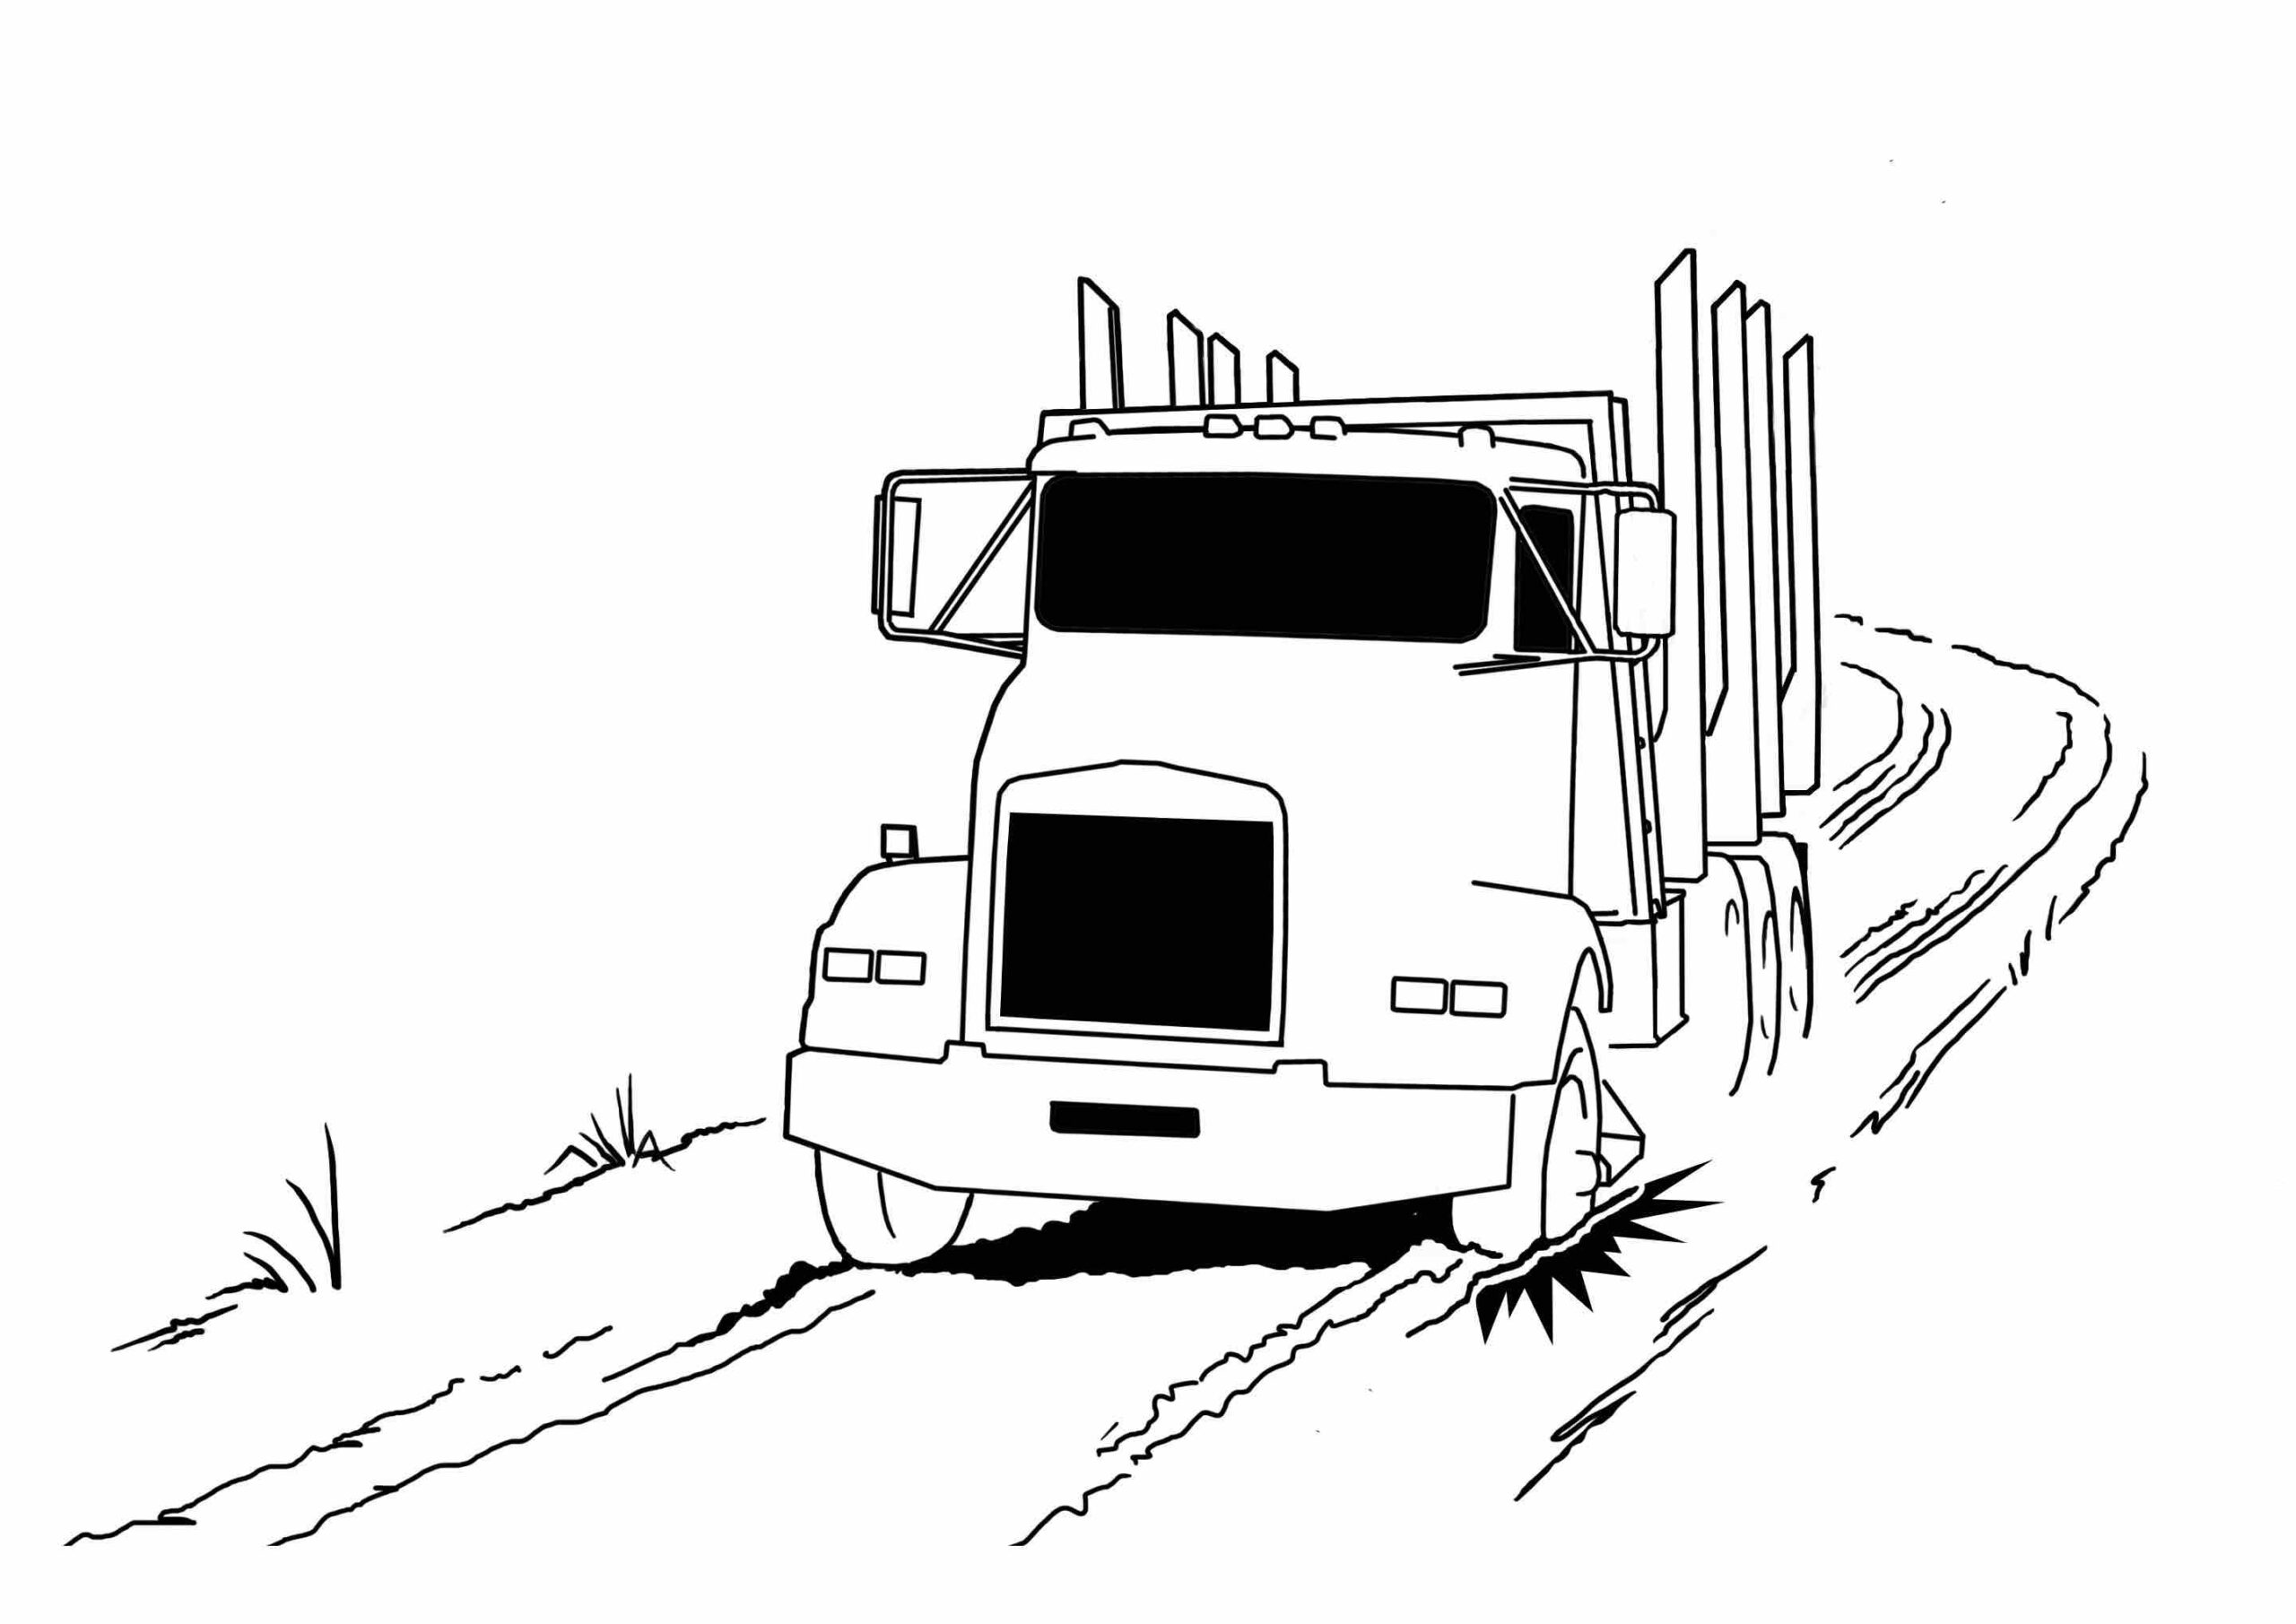 Base-and-Tail-Hold-Machines-Can-Create-Hazards-on-Haul-Roads Illustration